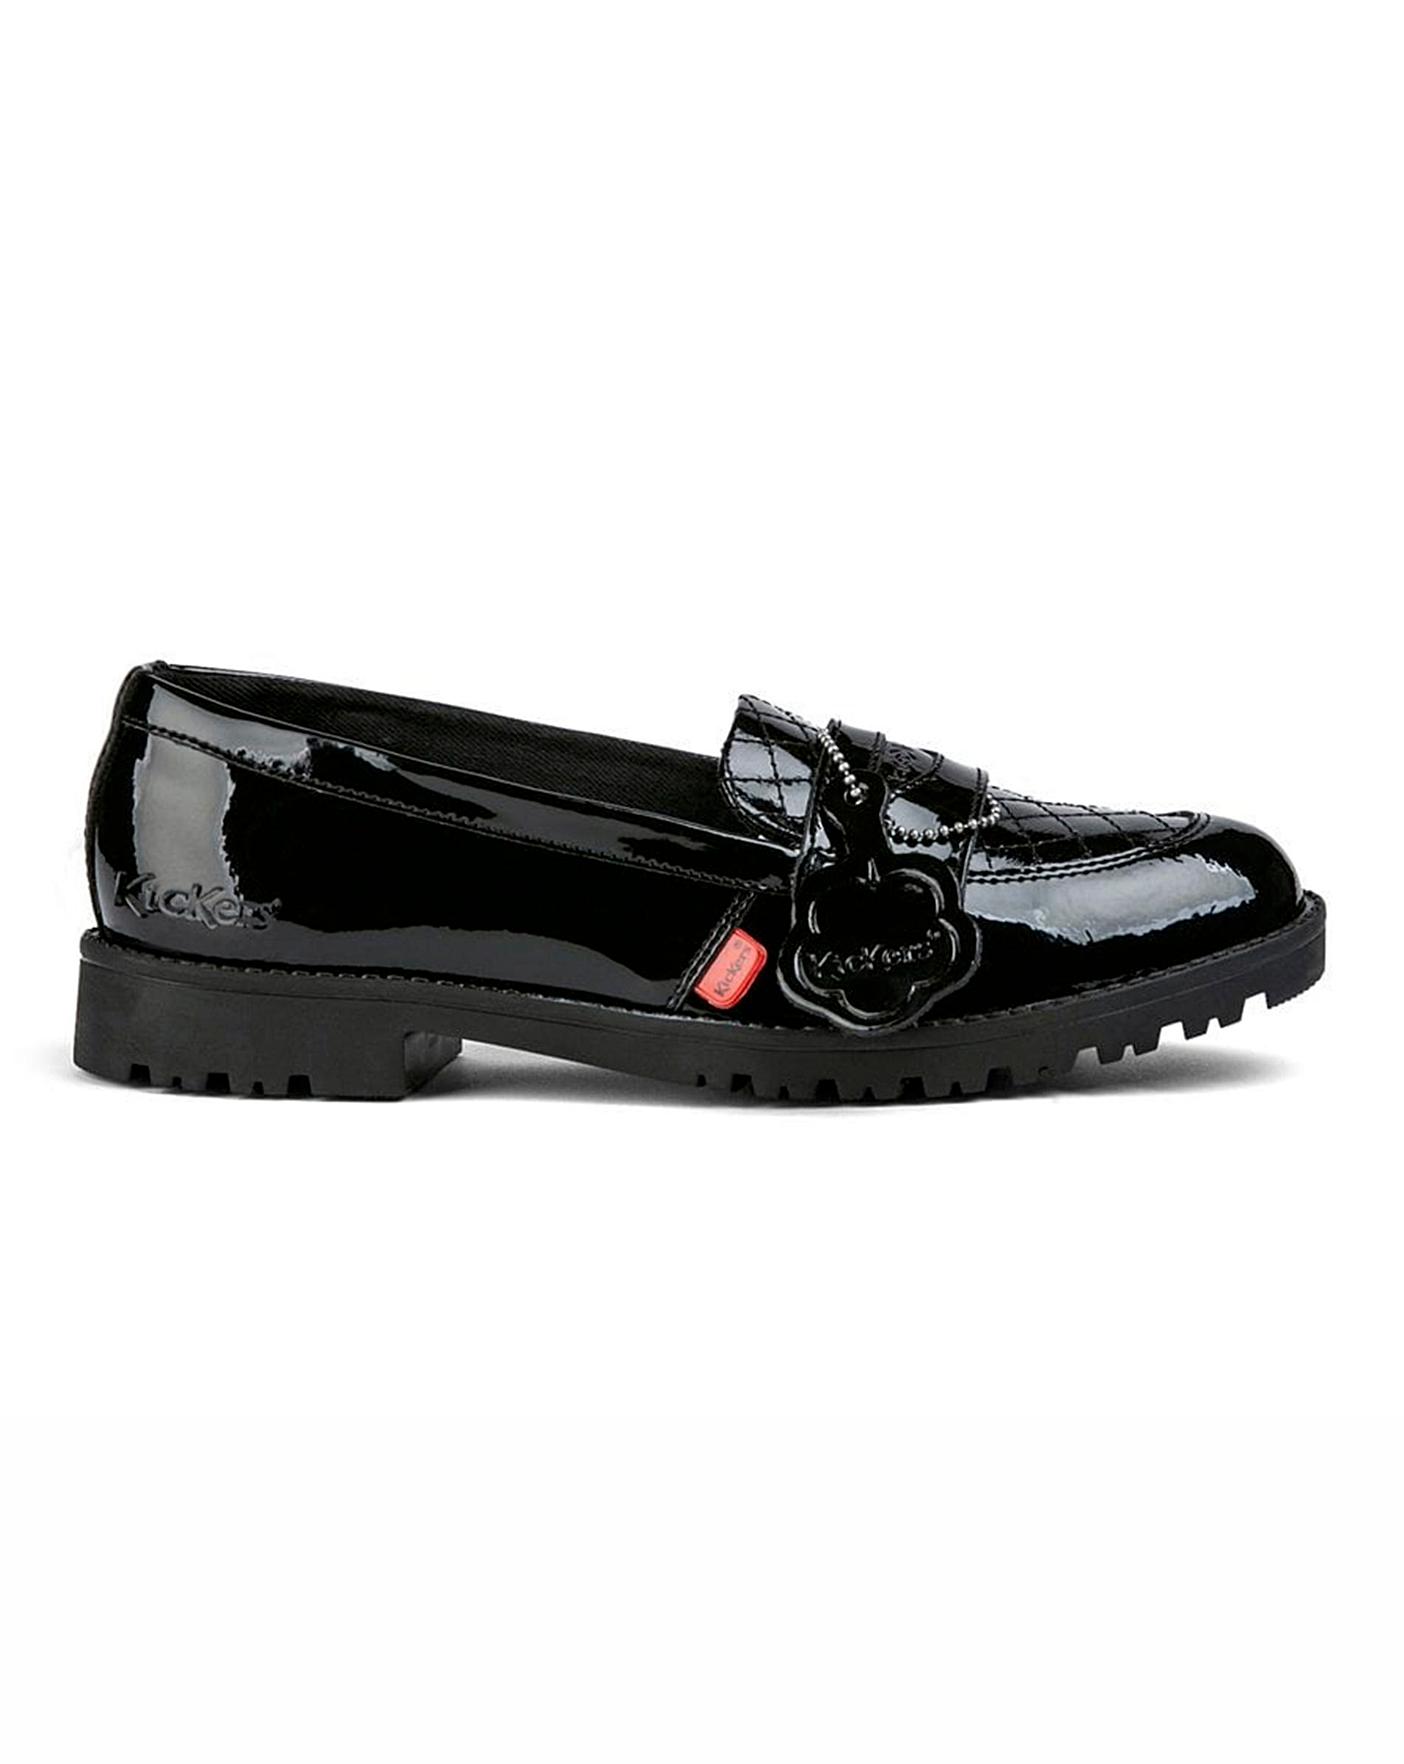 kickers lachly loafer patent